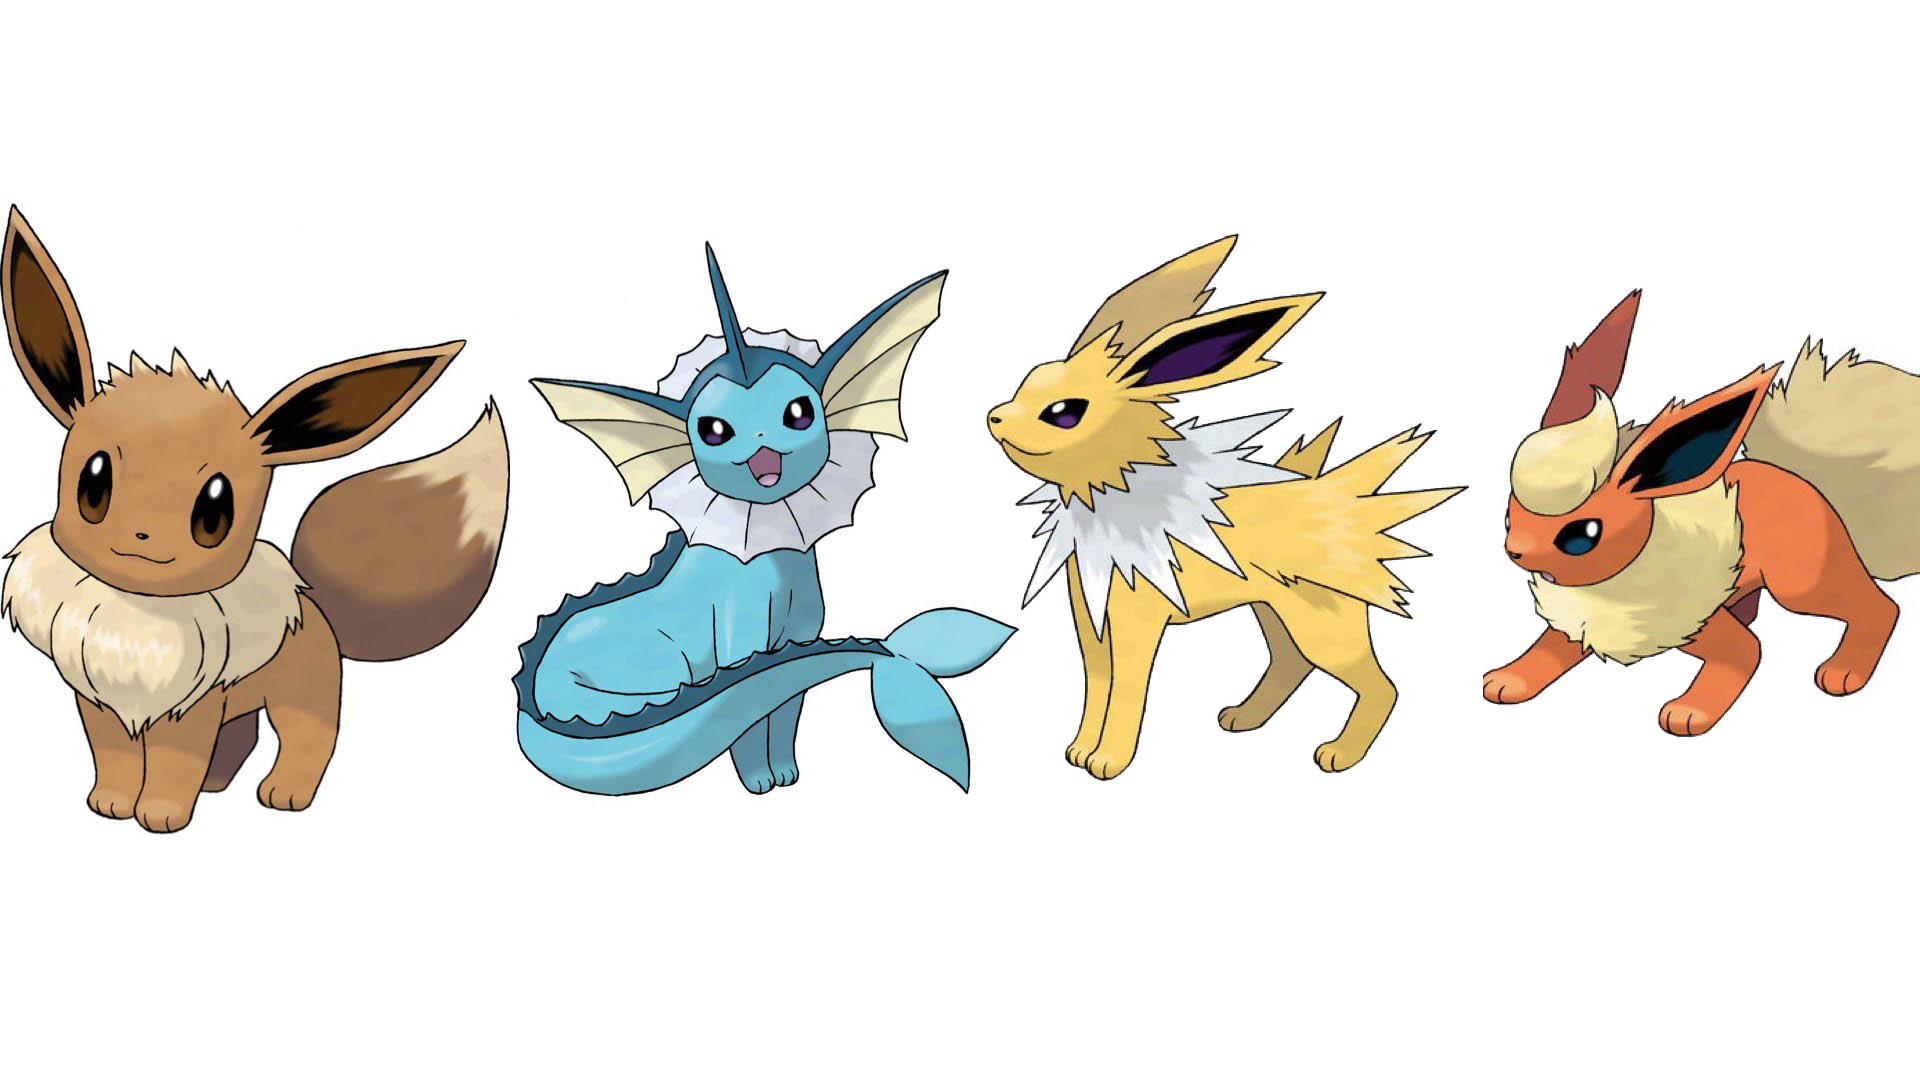 I’m not talking about the starters, but of Eevee and their friends. 